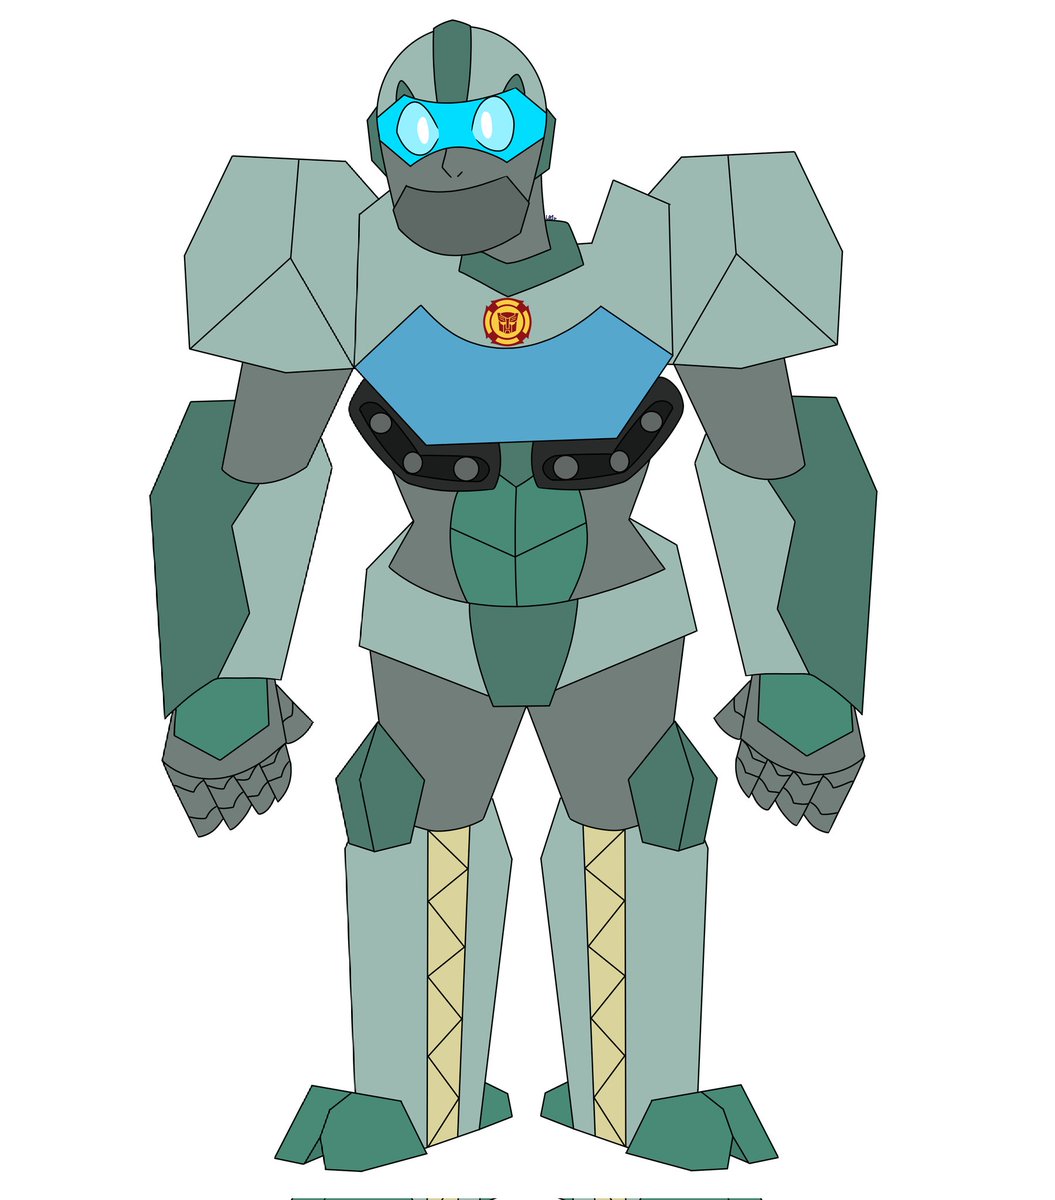 I can't stand the canon pre-earth designs of the Rescue Bots, so I made my own >:)

#transformers #transformersrescuebots #rescuebots #rescuebotschase #rescuebotsheatwave #rescuebotsblades #rescuebotsboulder #maccadams